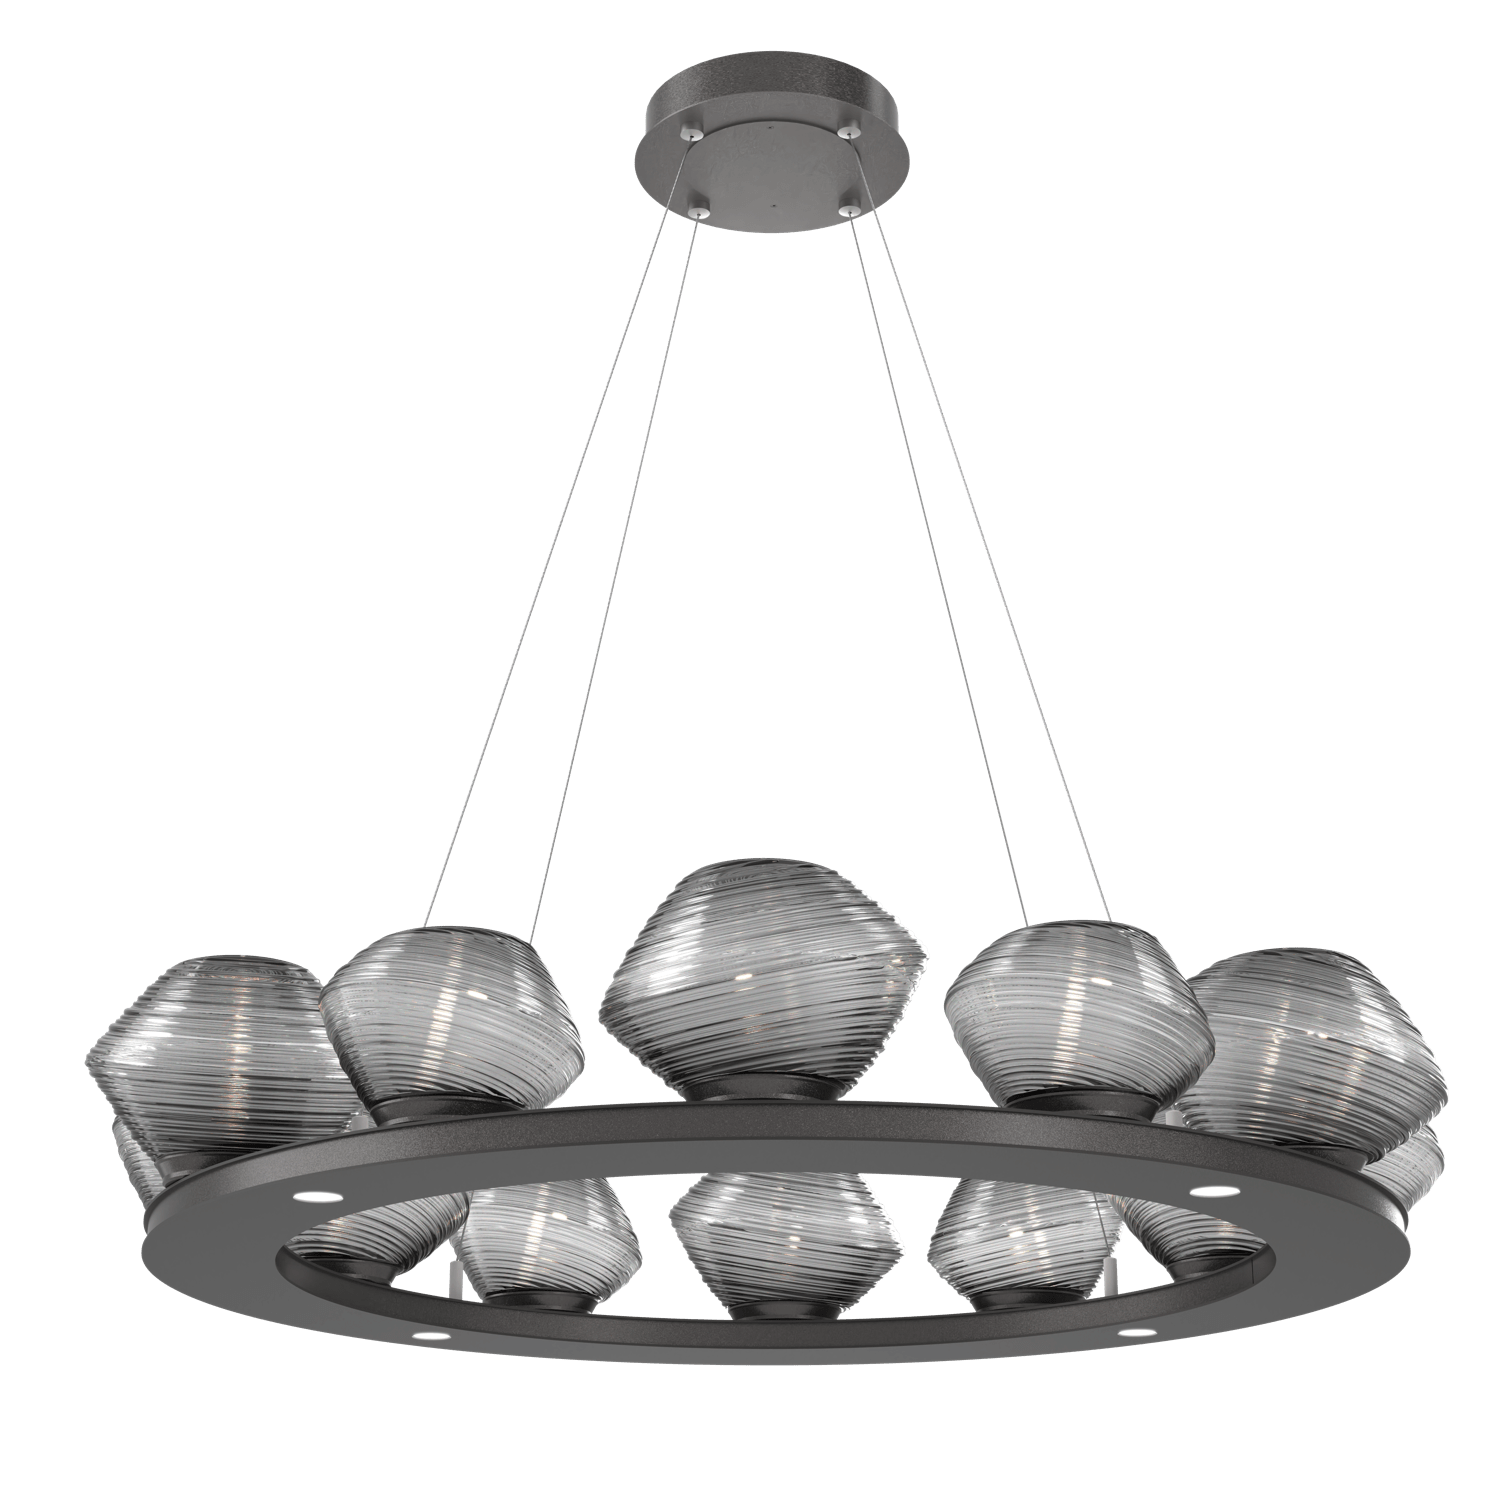 CHB0089-0C-GP-S-Hammerton-Studio-Mesa-36-inch-ring-chandelier-with-graphite-finish-and-smoke-blown-glass-shades-and-LED-lamping